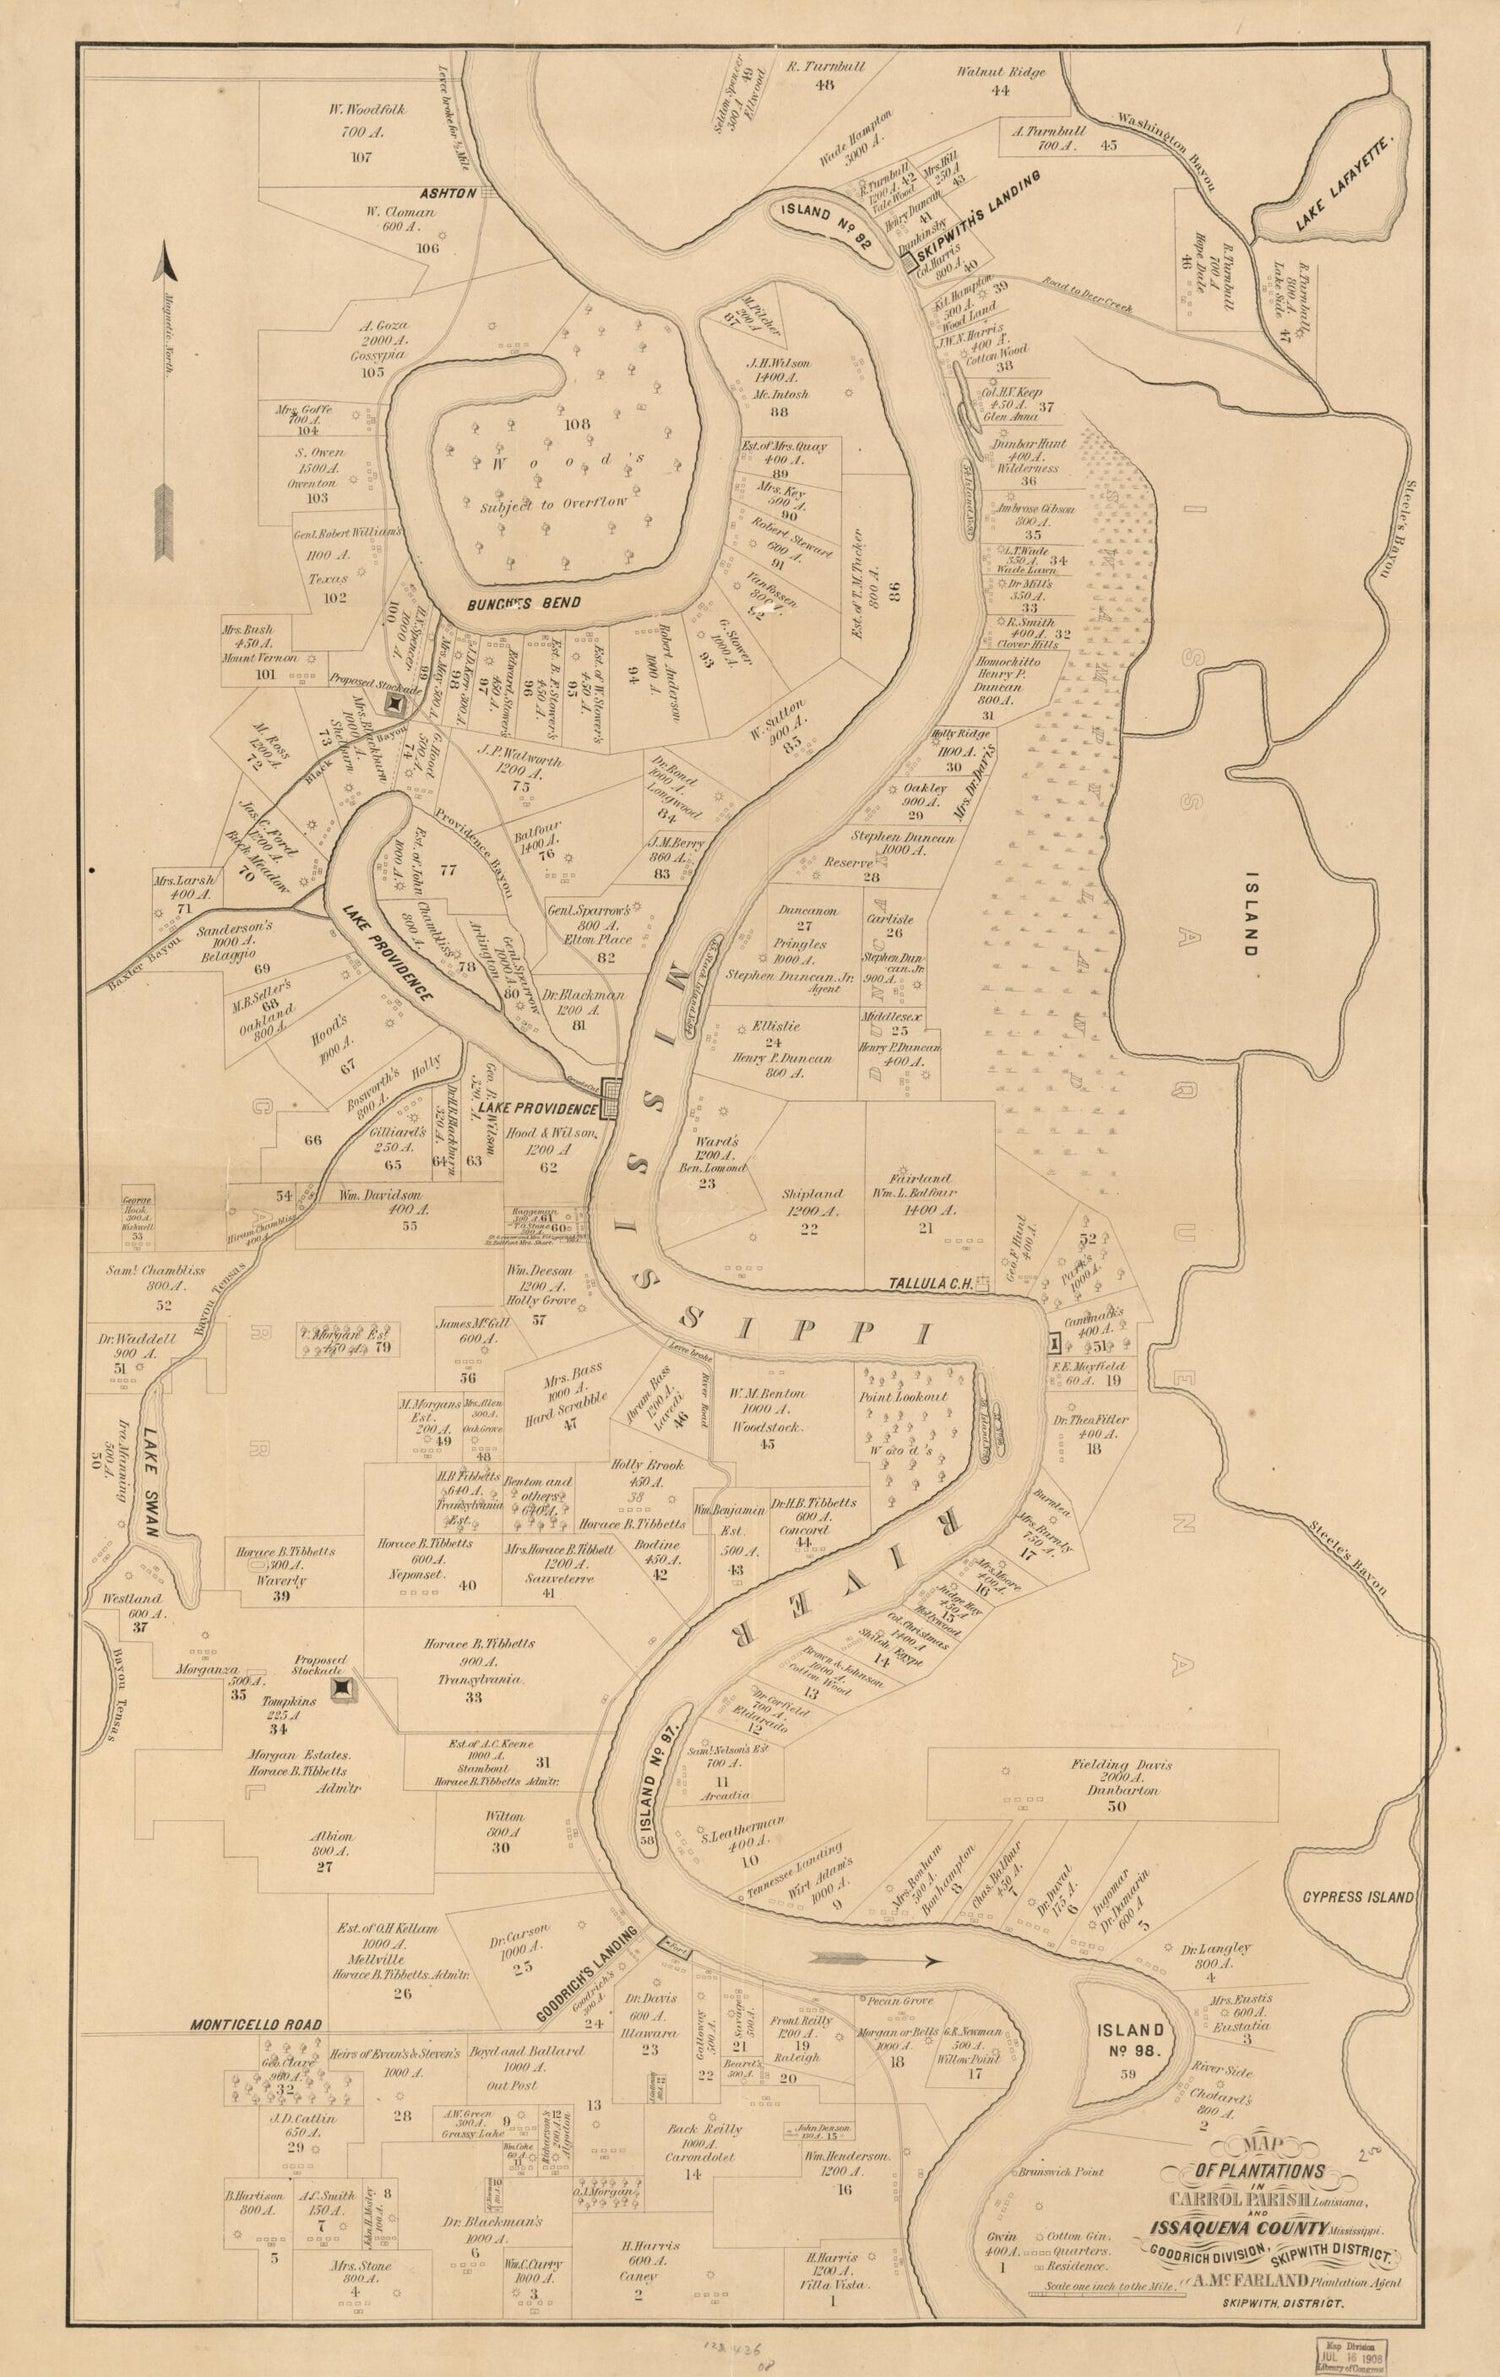 This old map of Map of Plantations In Carrol sic Parish, Louisiana and Issaquena County, Mississippi from 1860 was created by A. McFarland in 1860